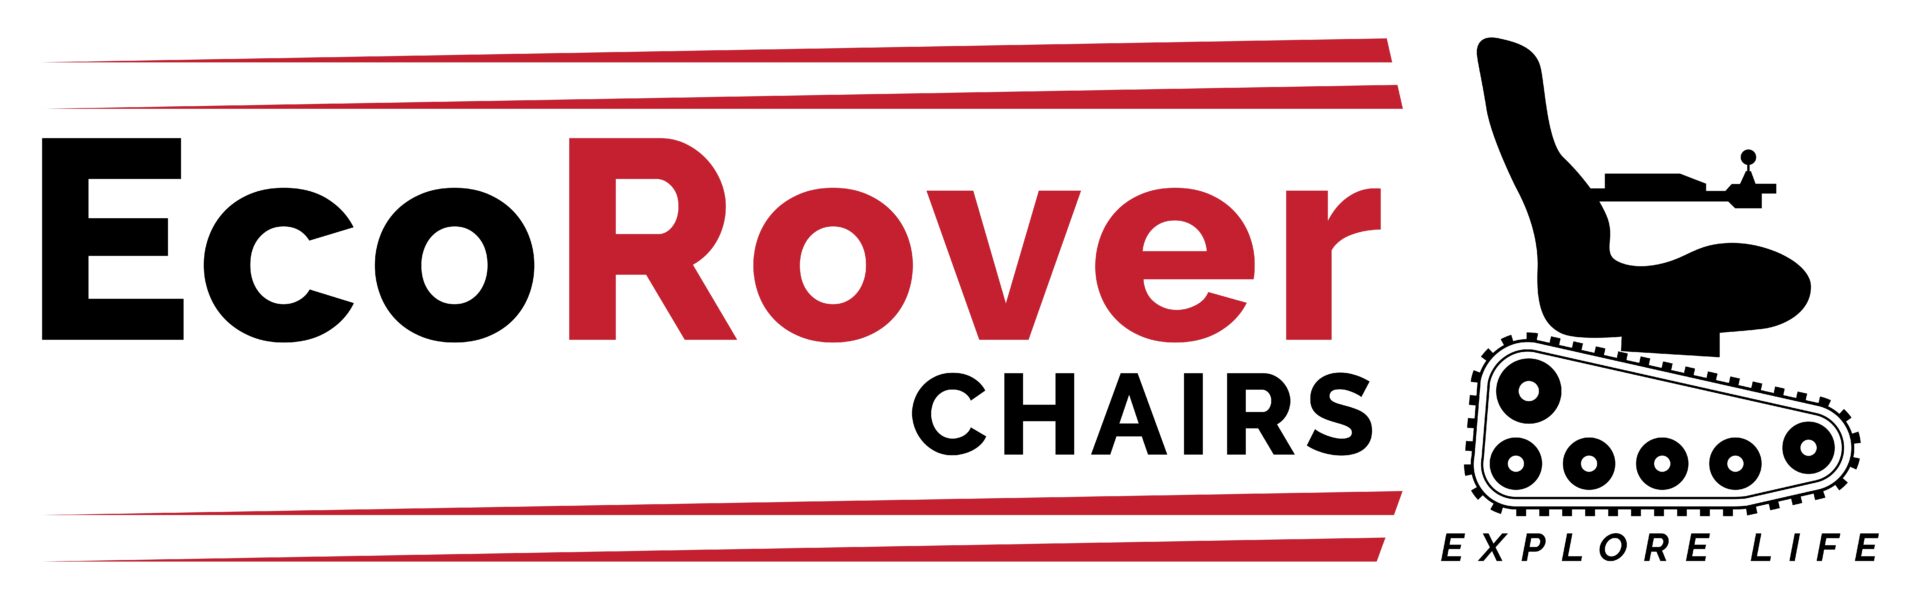 Eco rover chairs logo.